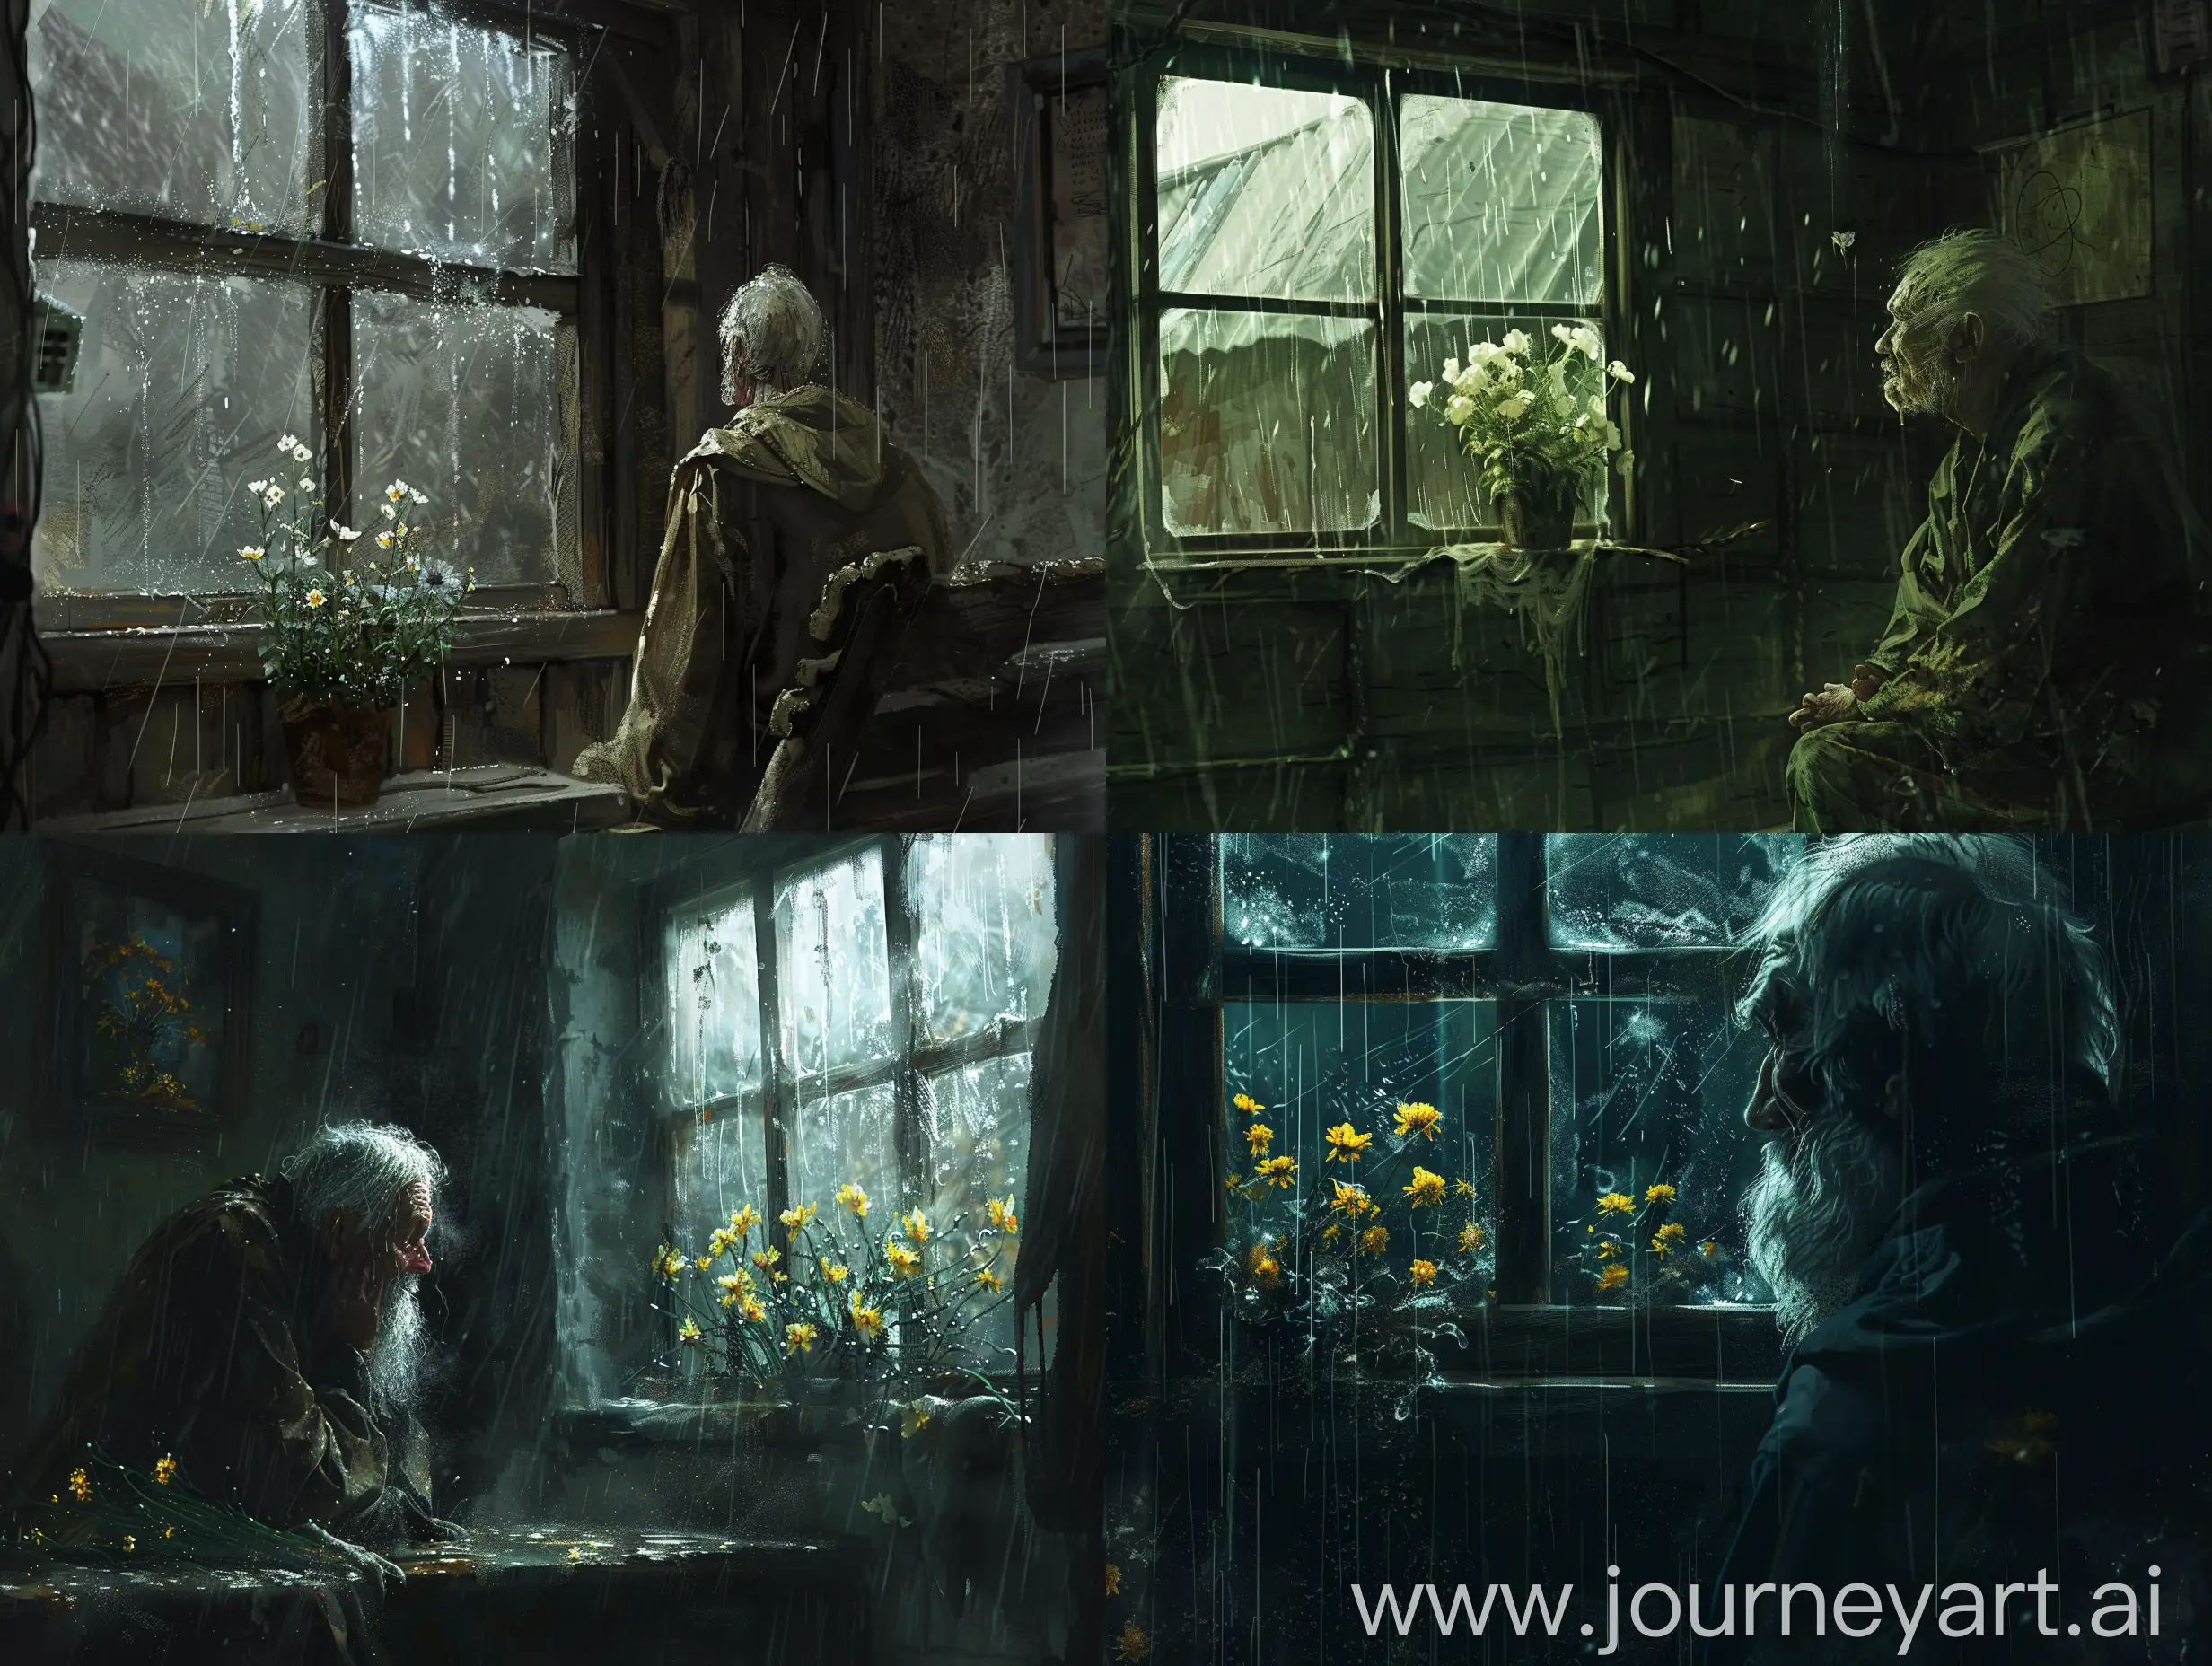 The image you have described is incredibly evocative, capturing a sense of deep emotion, solitude, and resilience. The AI will generate an image that conveys the ancient, solitary figure of the old man in his humble dwelling, gazing out of the rain-streaked window at the wilting flowers. The atmosphere will be filled with a melancholic yet enduring feeling, reflecting the old man's contemplation of the passage of time and the bittersweet memories of his heroic ambitions. The AI will also emphasize the contrast between the fragility of the flowers outside and the old man's inner strength, creating a powerful and poignant visual representation of your description.